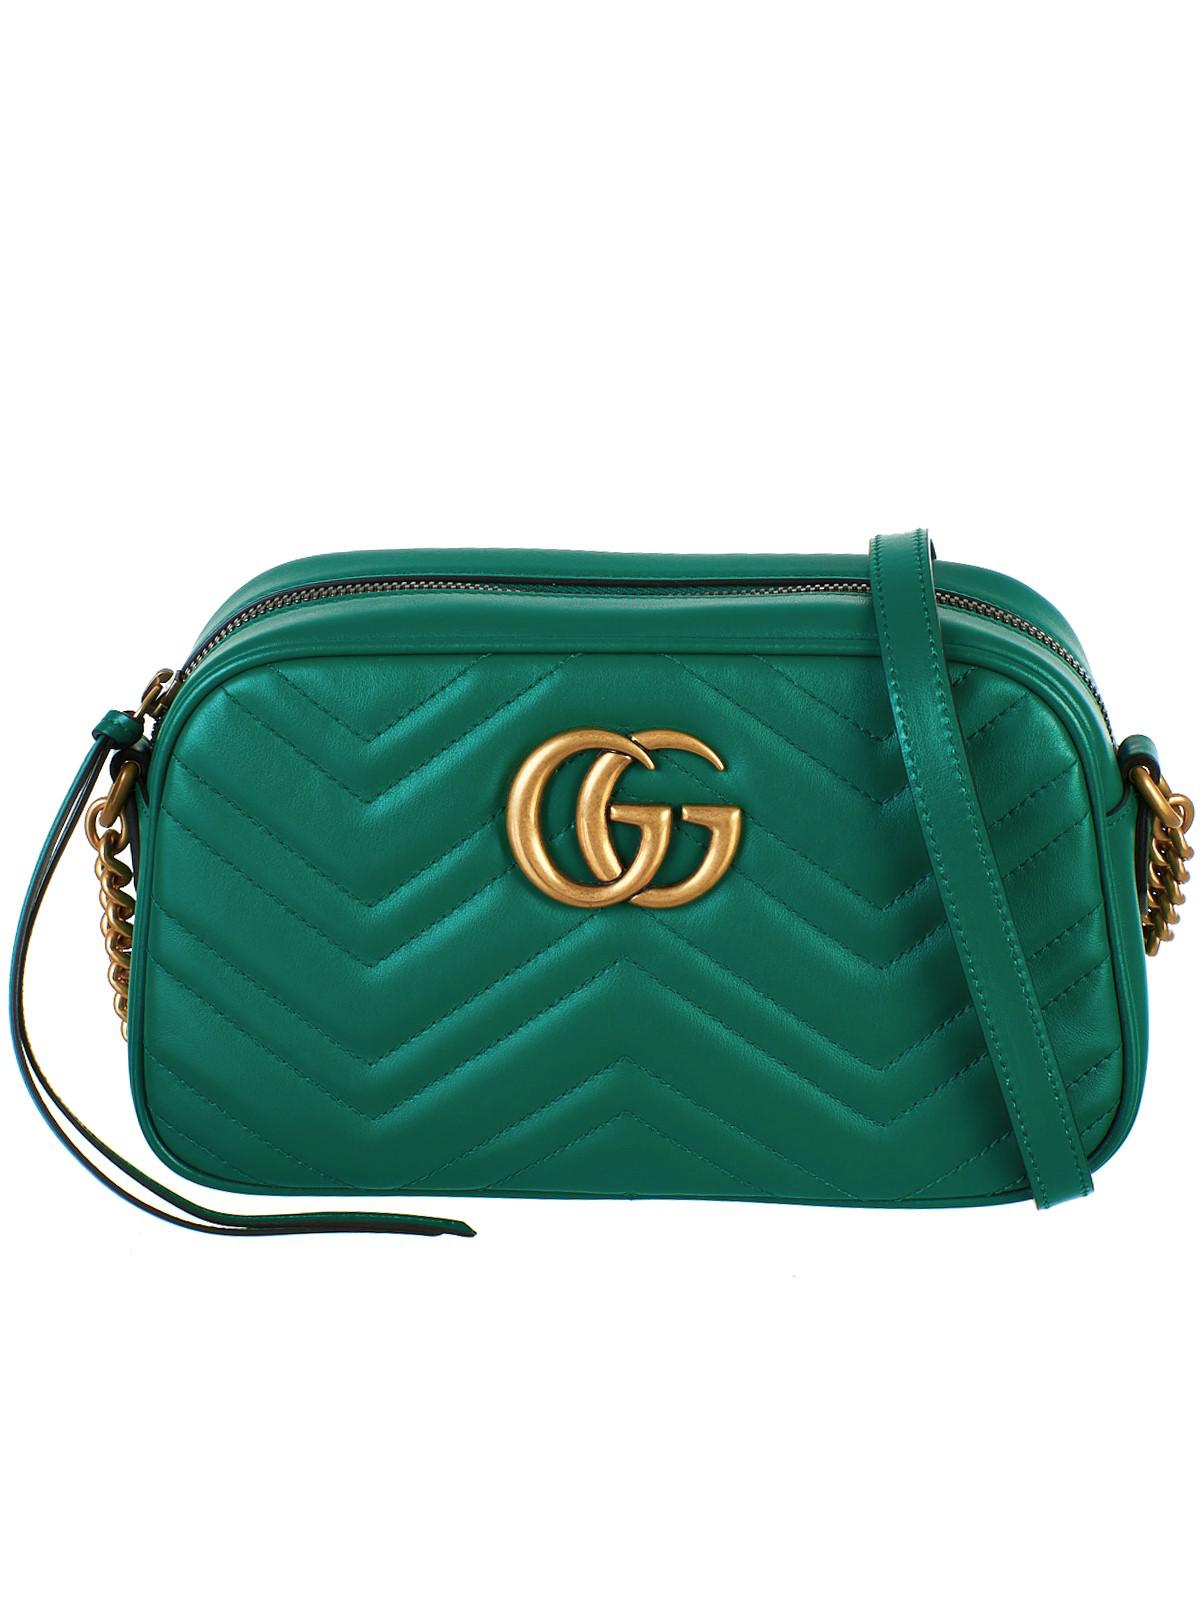 Gucci Leather GG Marmont Small Shoulder Bag in Emerald Green (Green) - Lyst